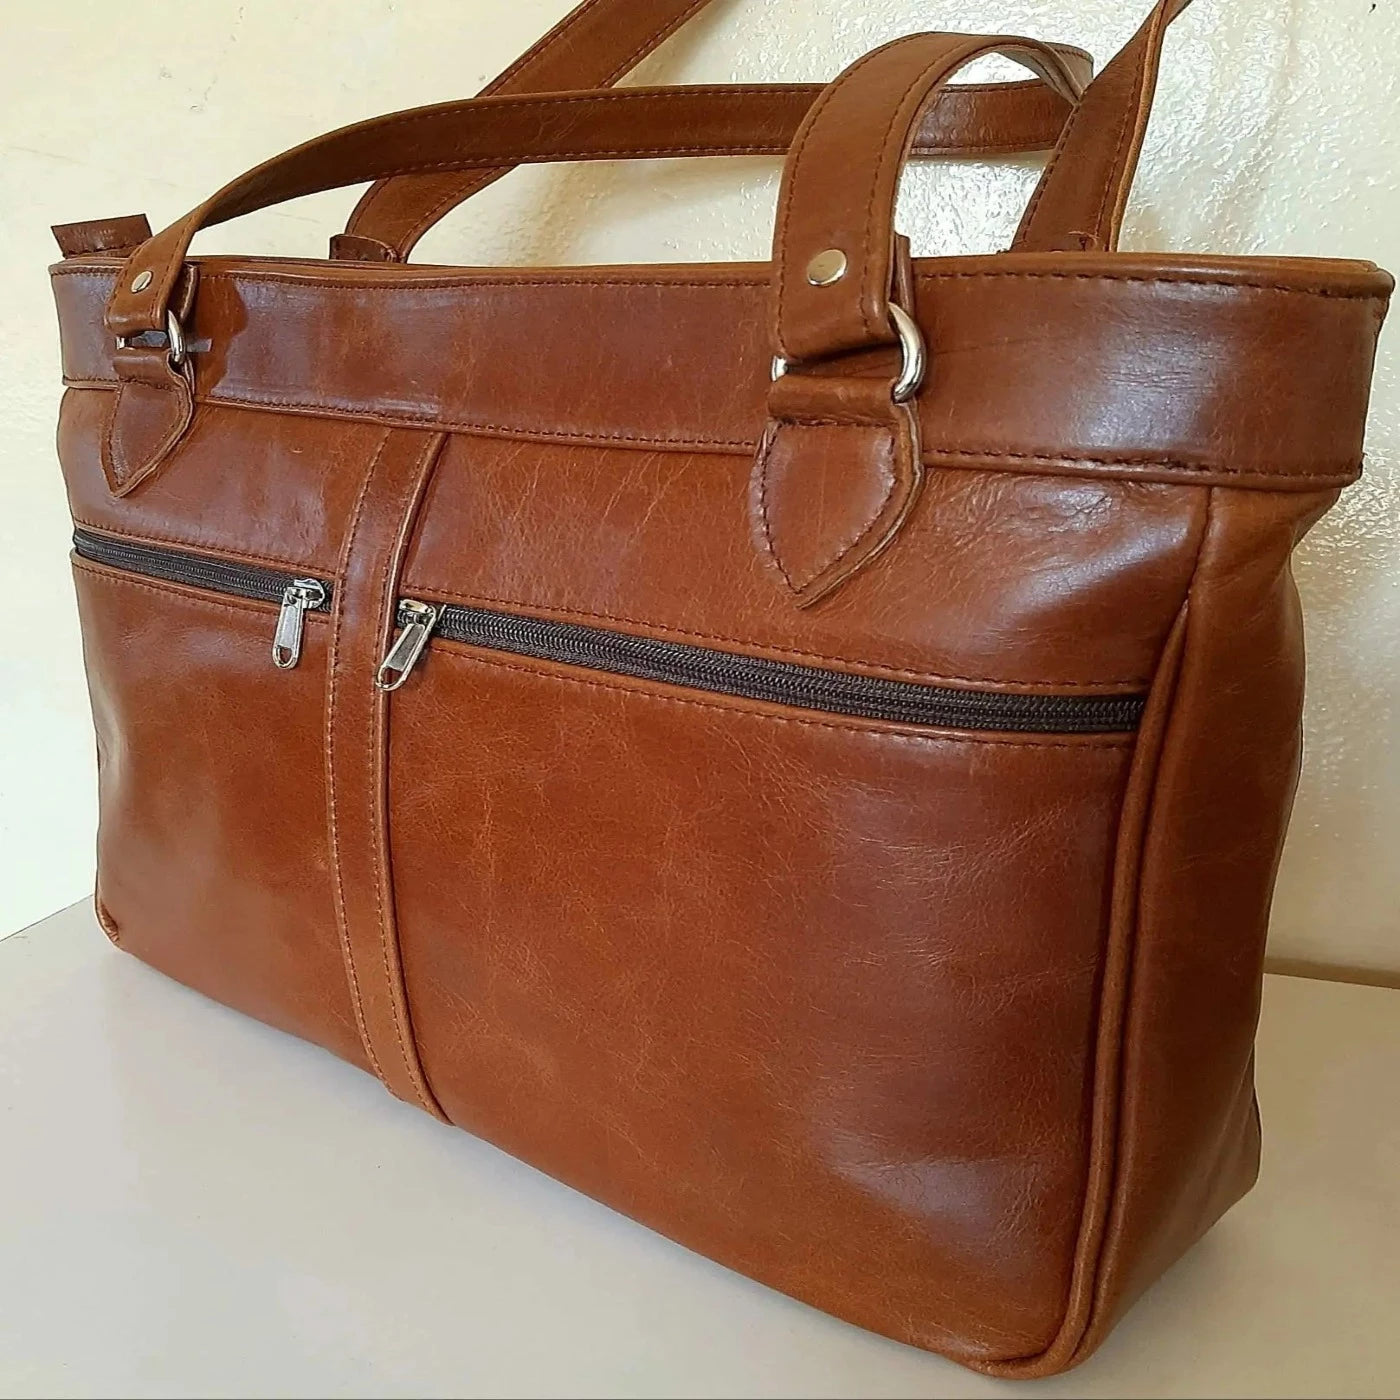 Tote leather bags Xl in light tan colour made by  cape Masai Leather